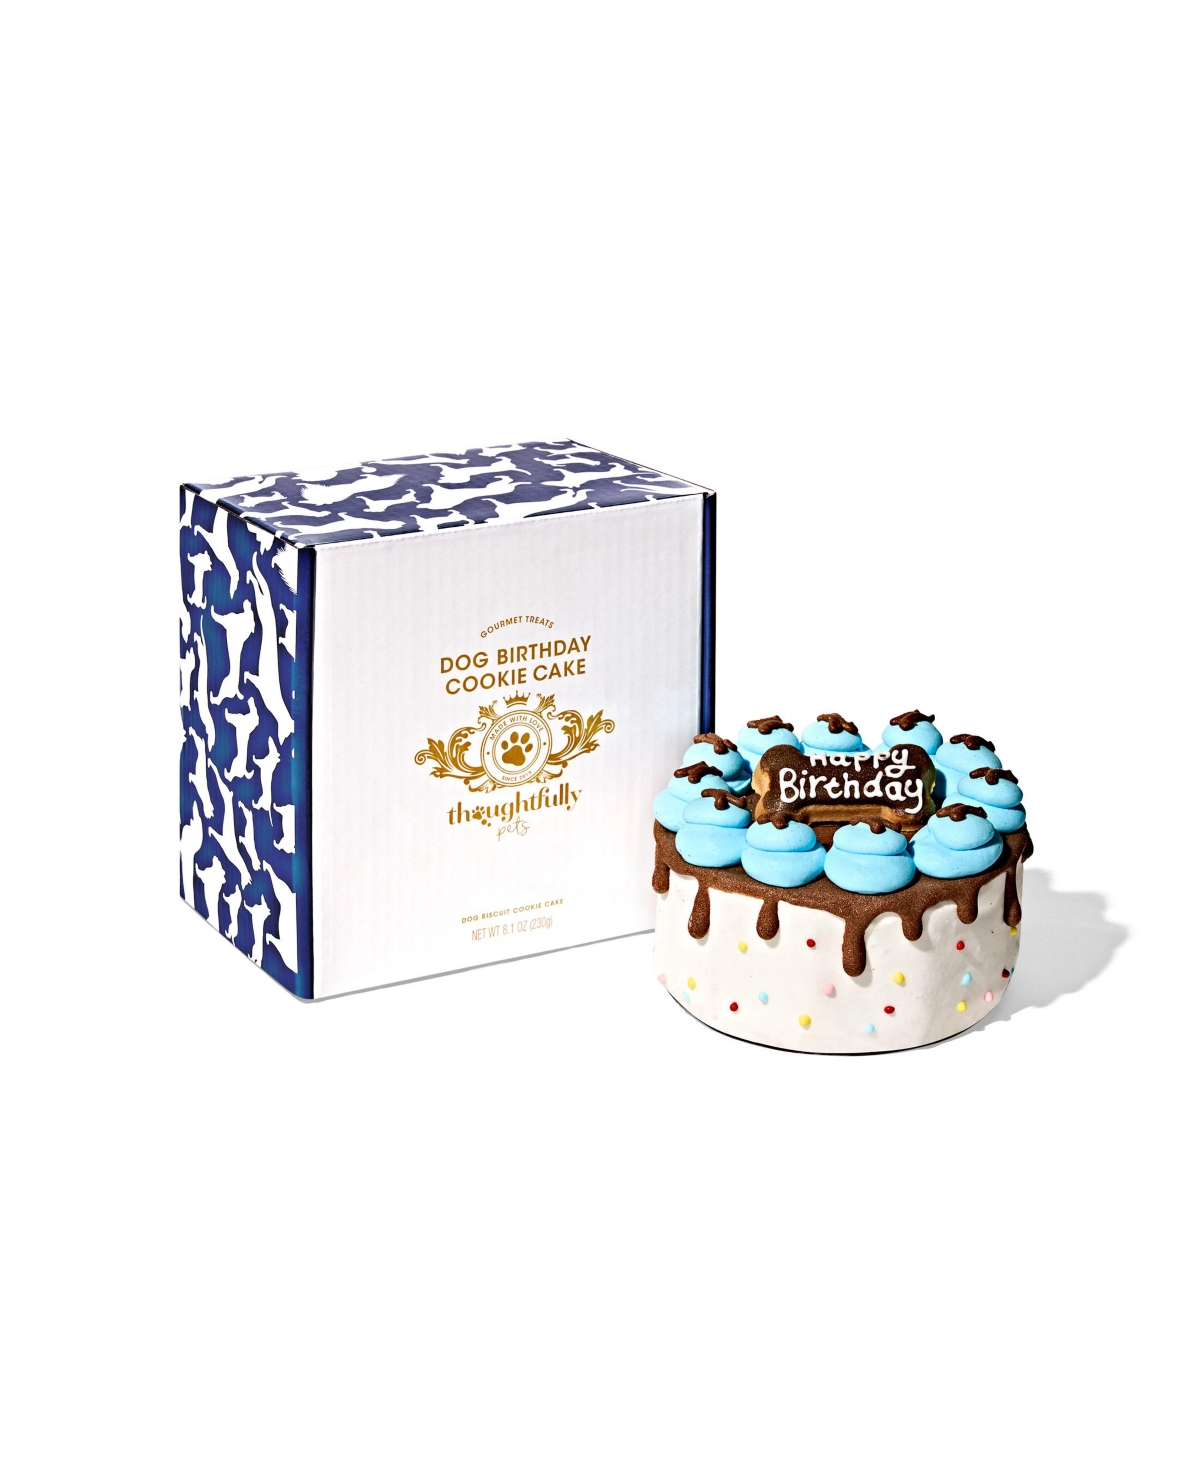 Pets, Dog Happy Birthday Mini Cookie Cake, Blue, Peanut Butter Flavored - Assorted Pre-pack